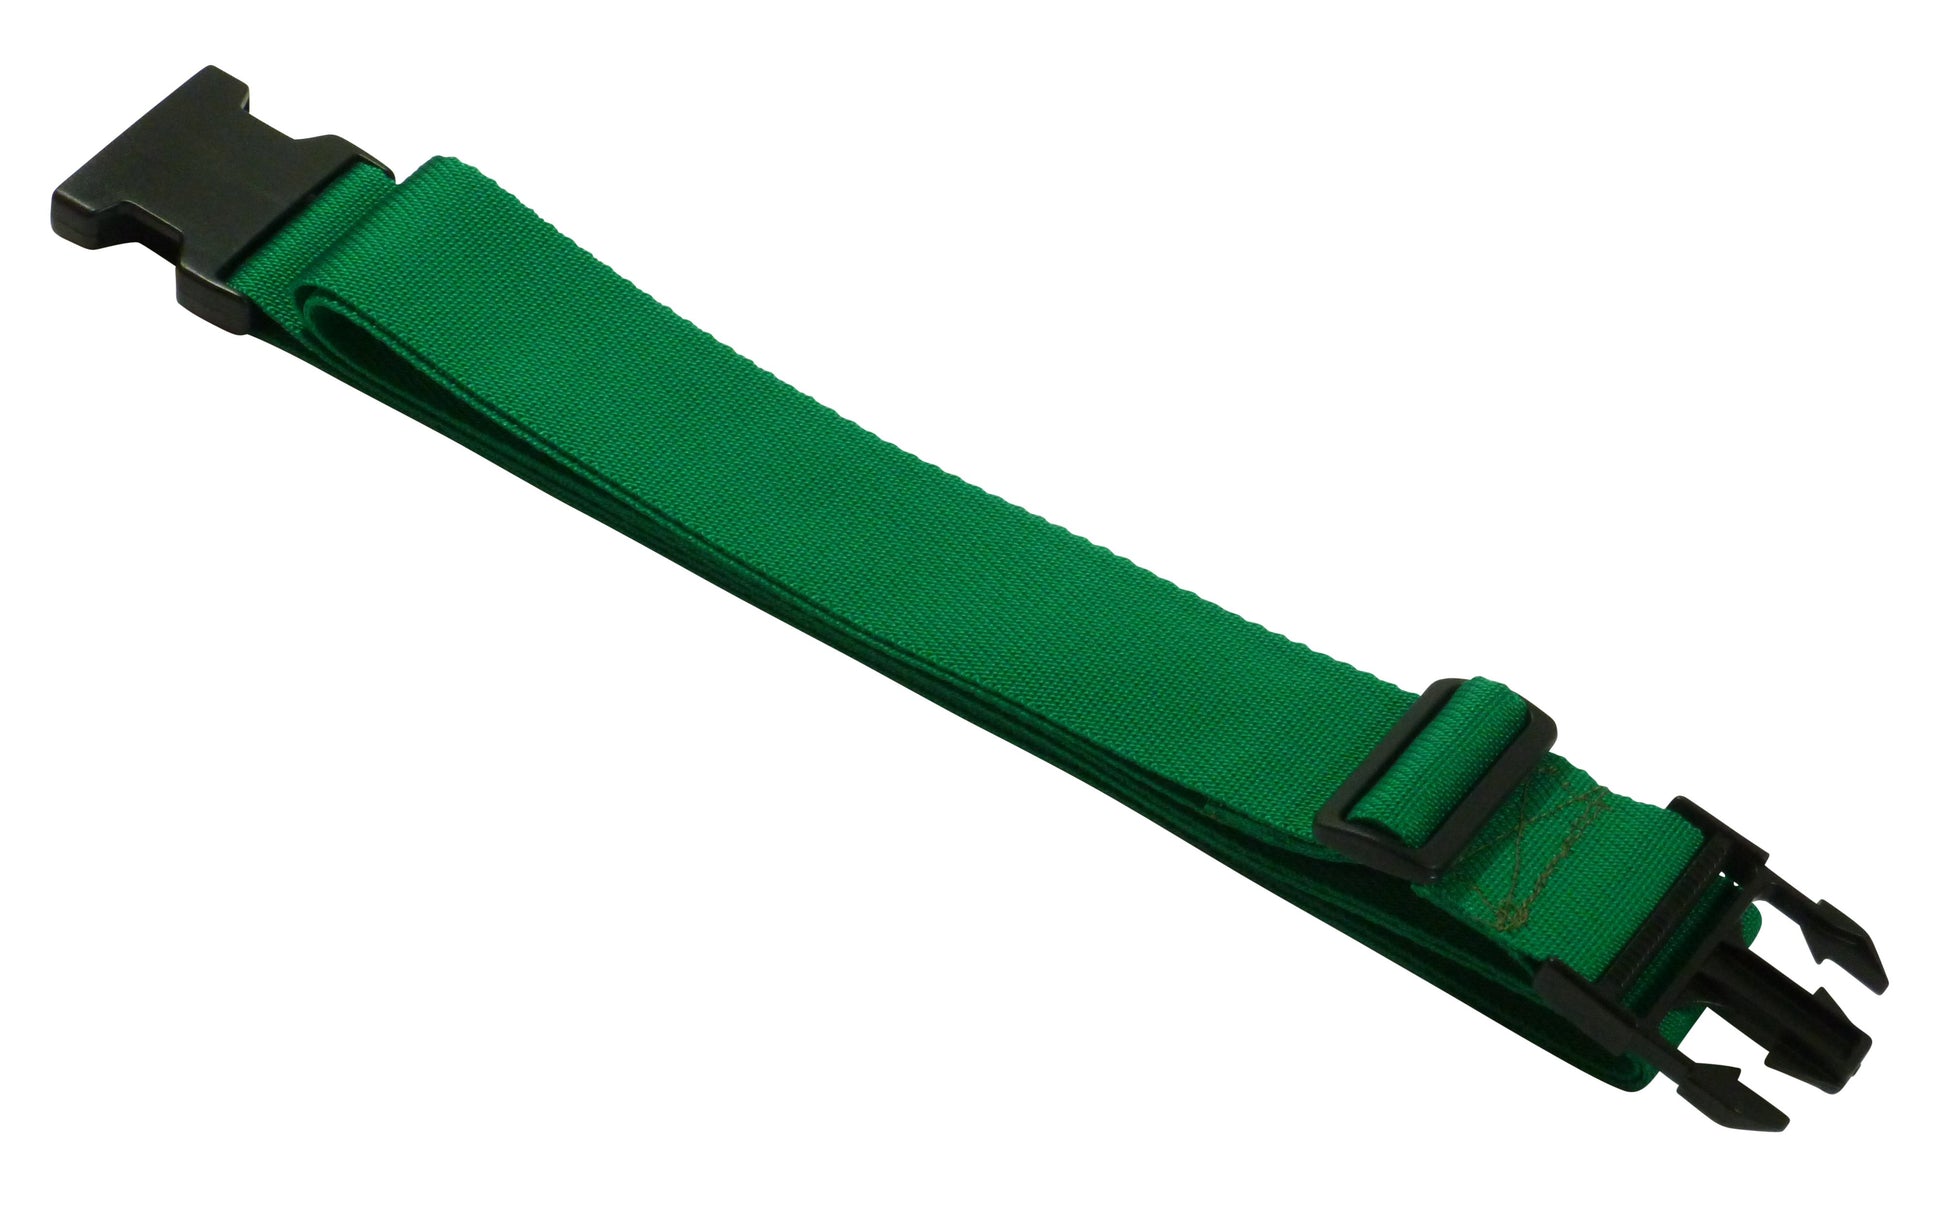 Benristraps 50mm Webbing Strap with Quick Release & Length-Adjusting Buckles in emerald